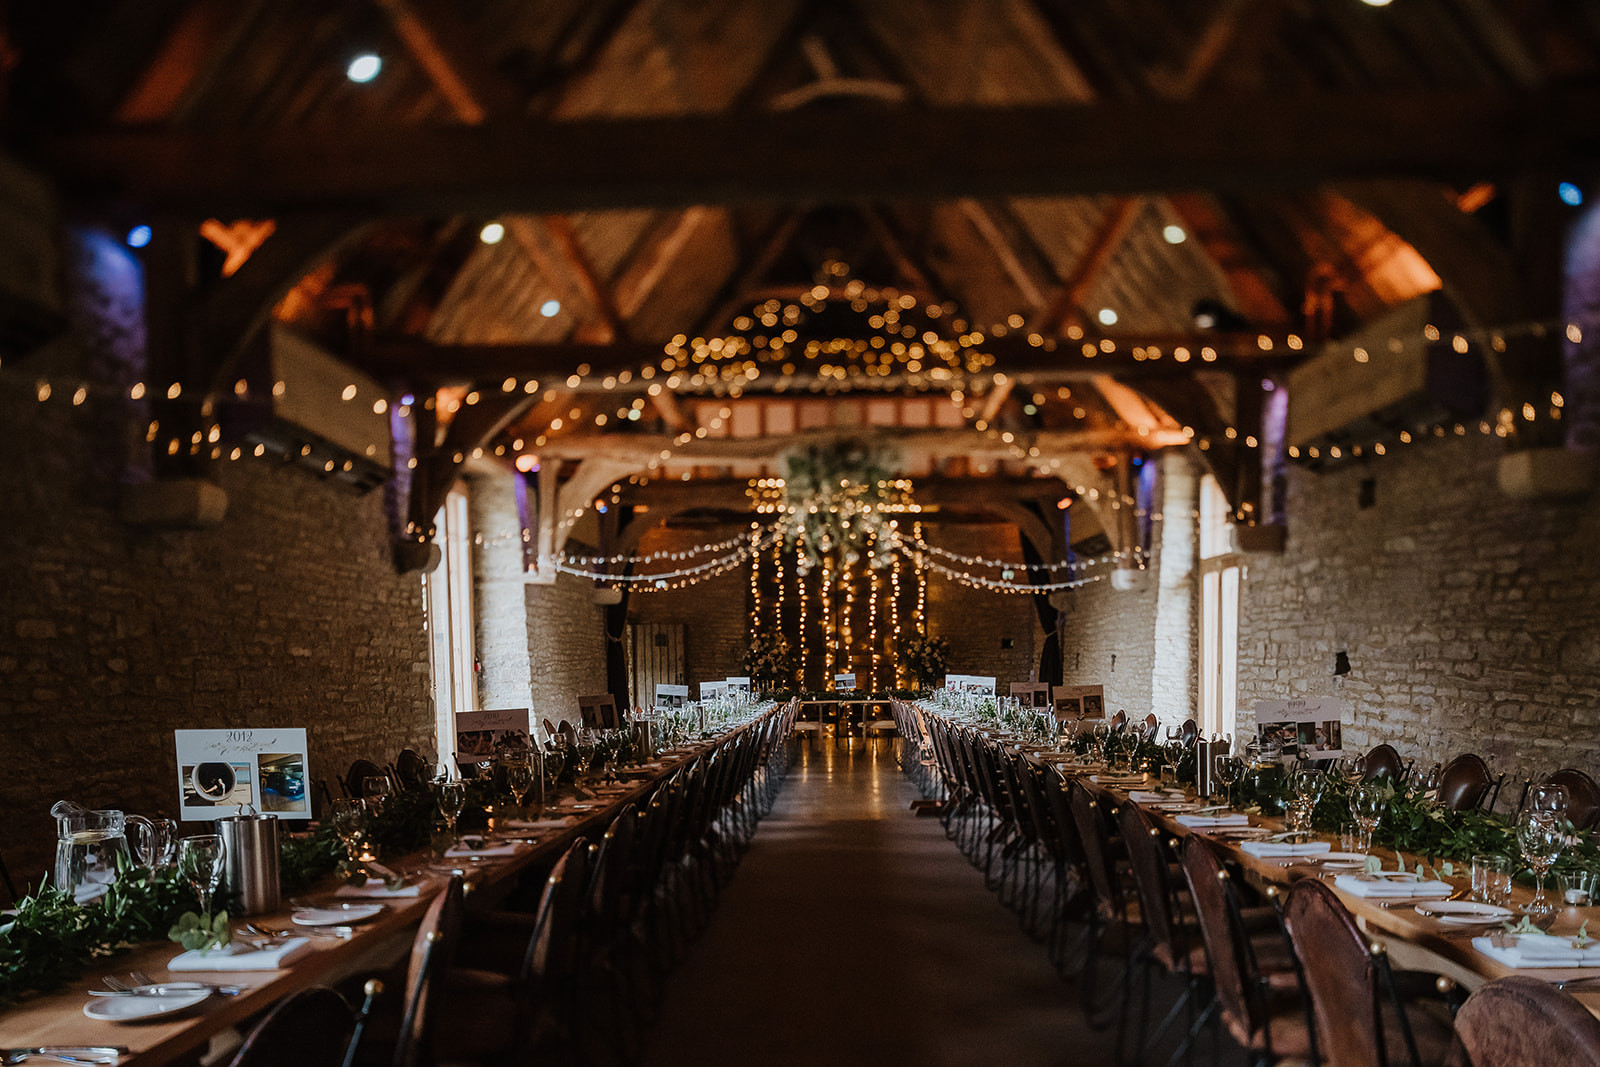 Flexible, chilled, relaxed and super-efficient is the vibe at The Tythe Barn, Launton – no wonder they win so many awards! Pre-registration by email essential so sign up and ensure you don't miss out. And just when you think life pre-wedding can't get any better they throw this offer out there -  email info@thetythebarn.co.uk to confirm your attendance and you will be put on their VIP List which, once you've registered on the day, gains you entry into their prize draw to win The Tythe Barn's Luxury Bridal Hamper.  Now knowing The Tythe Barn, Launton ...that is going to be something ridiculously special!